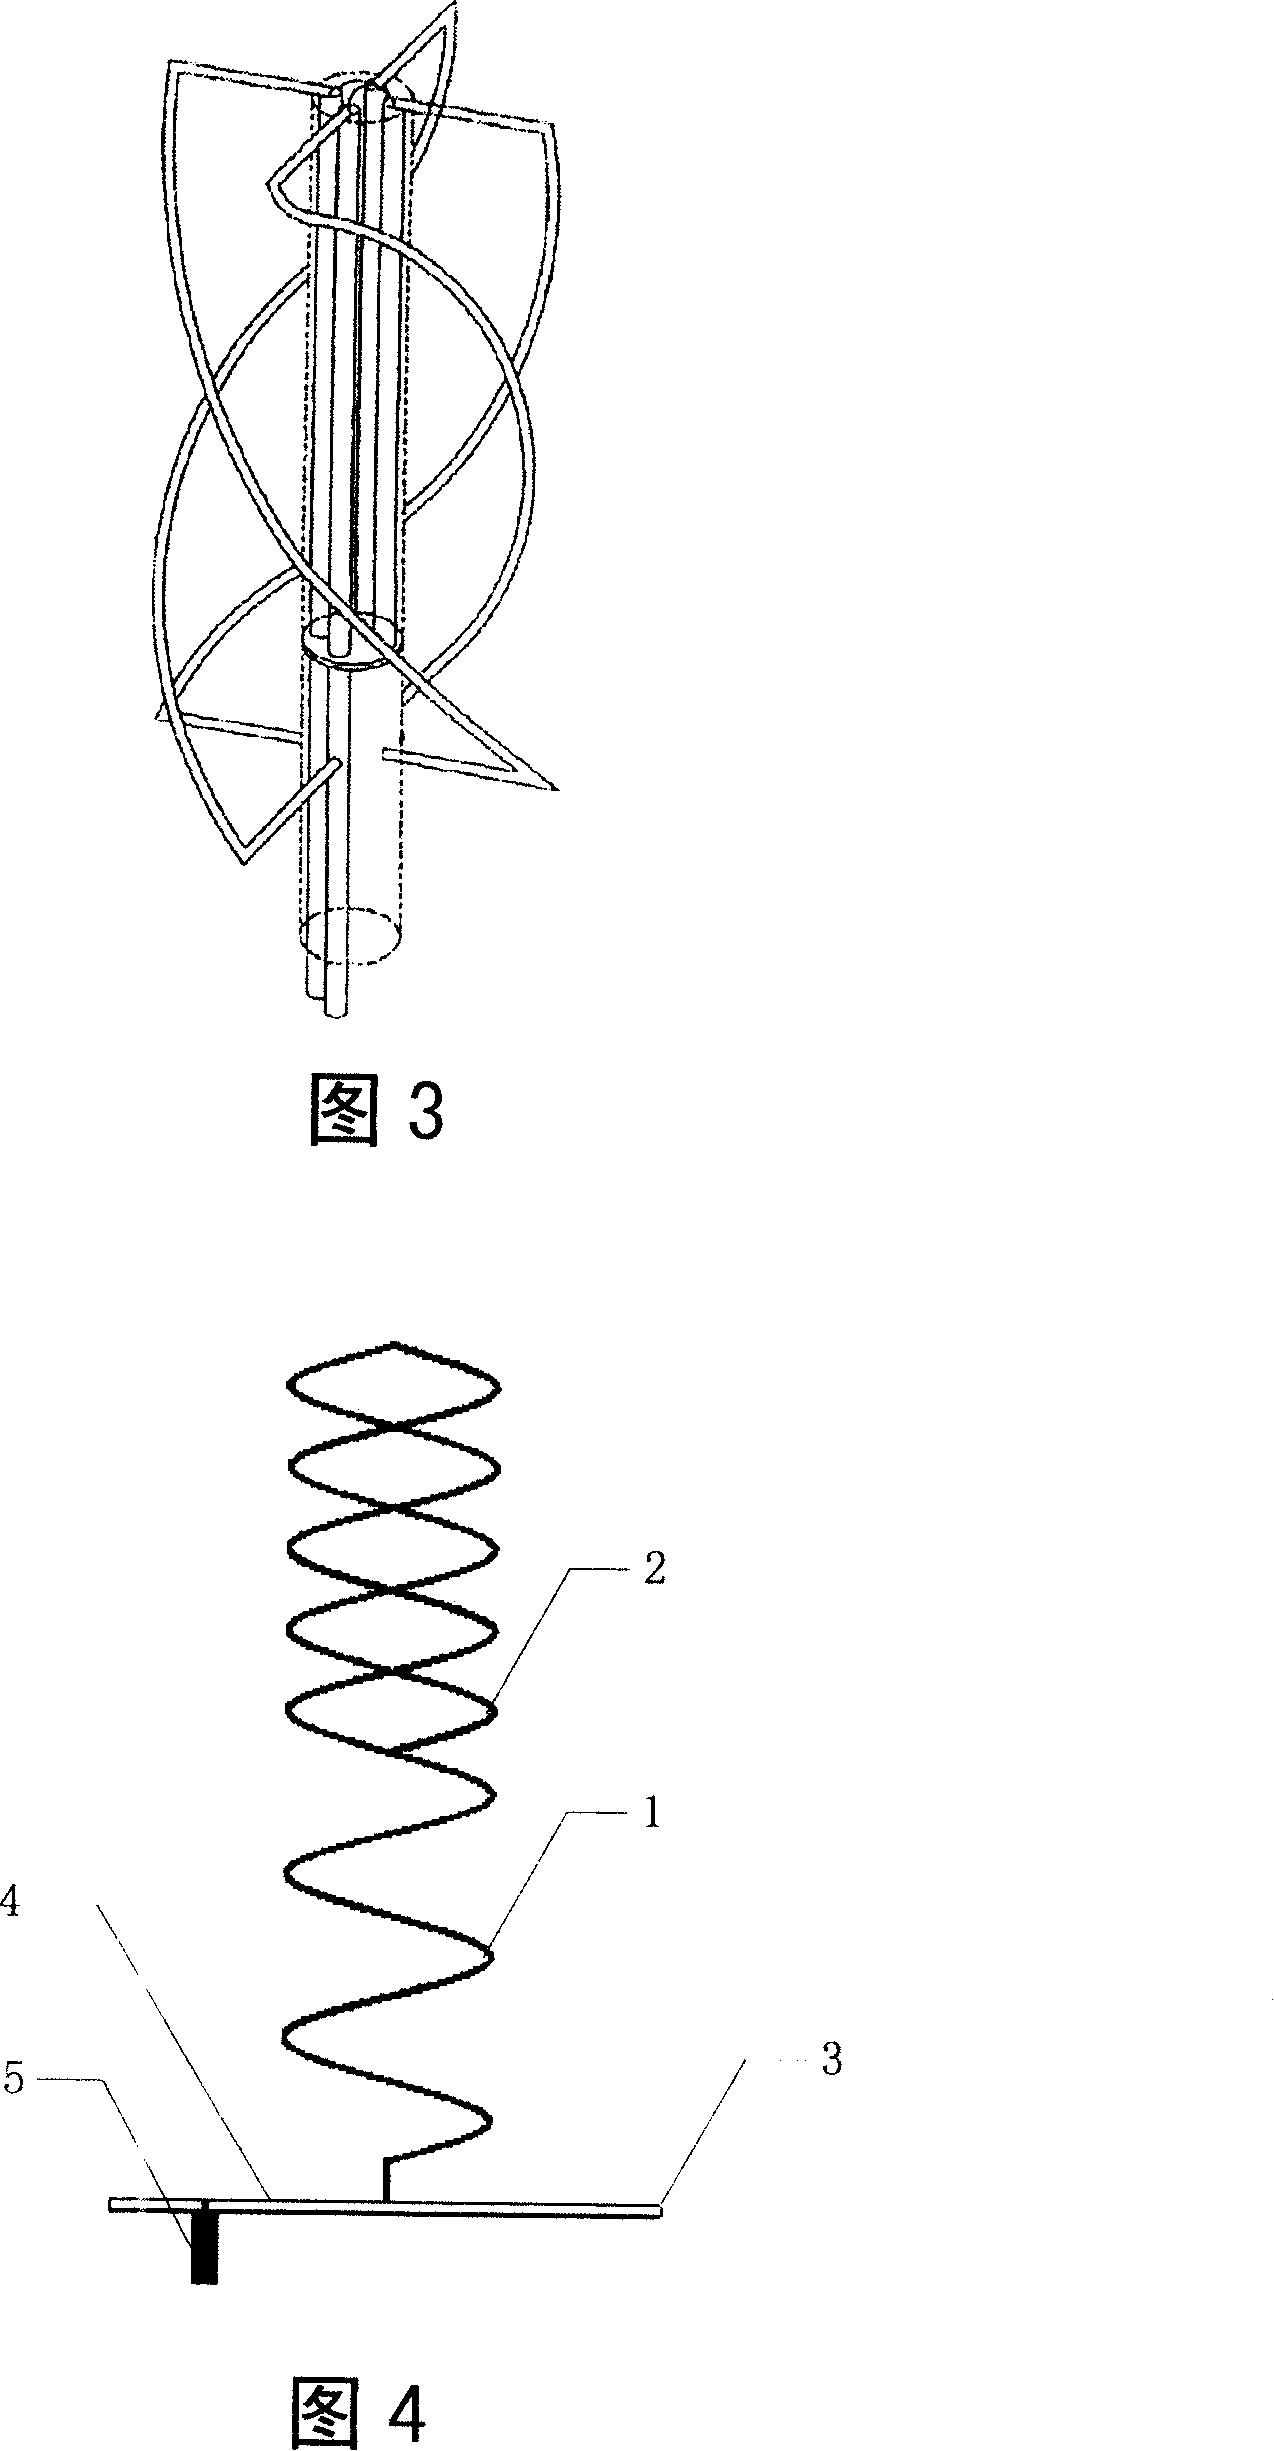 Double-ellipse helical antenna